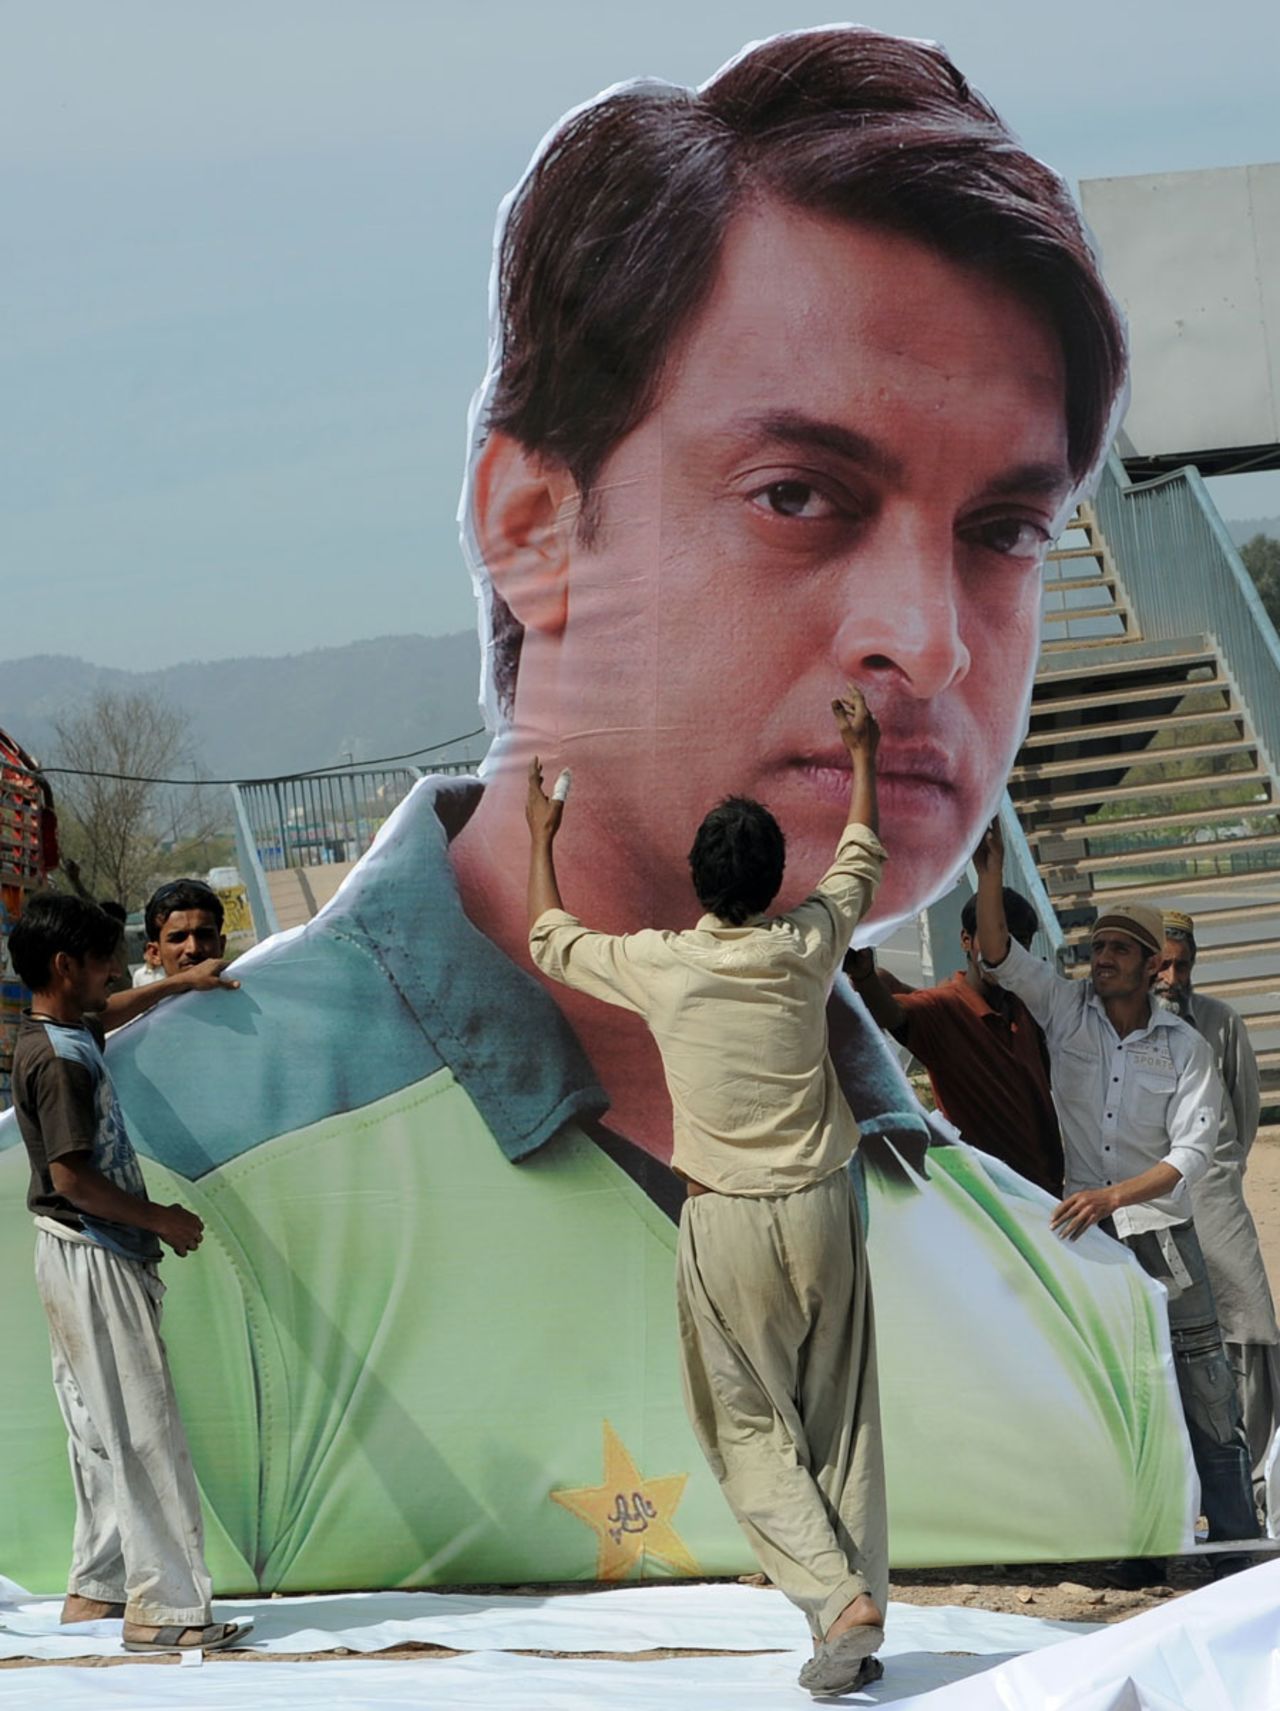 Labourers erect a giant billboard of Shoaib Akhtar who will retire after the World Cup, Islamabad, March 21, 2011